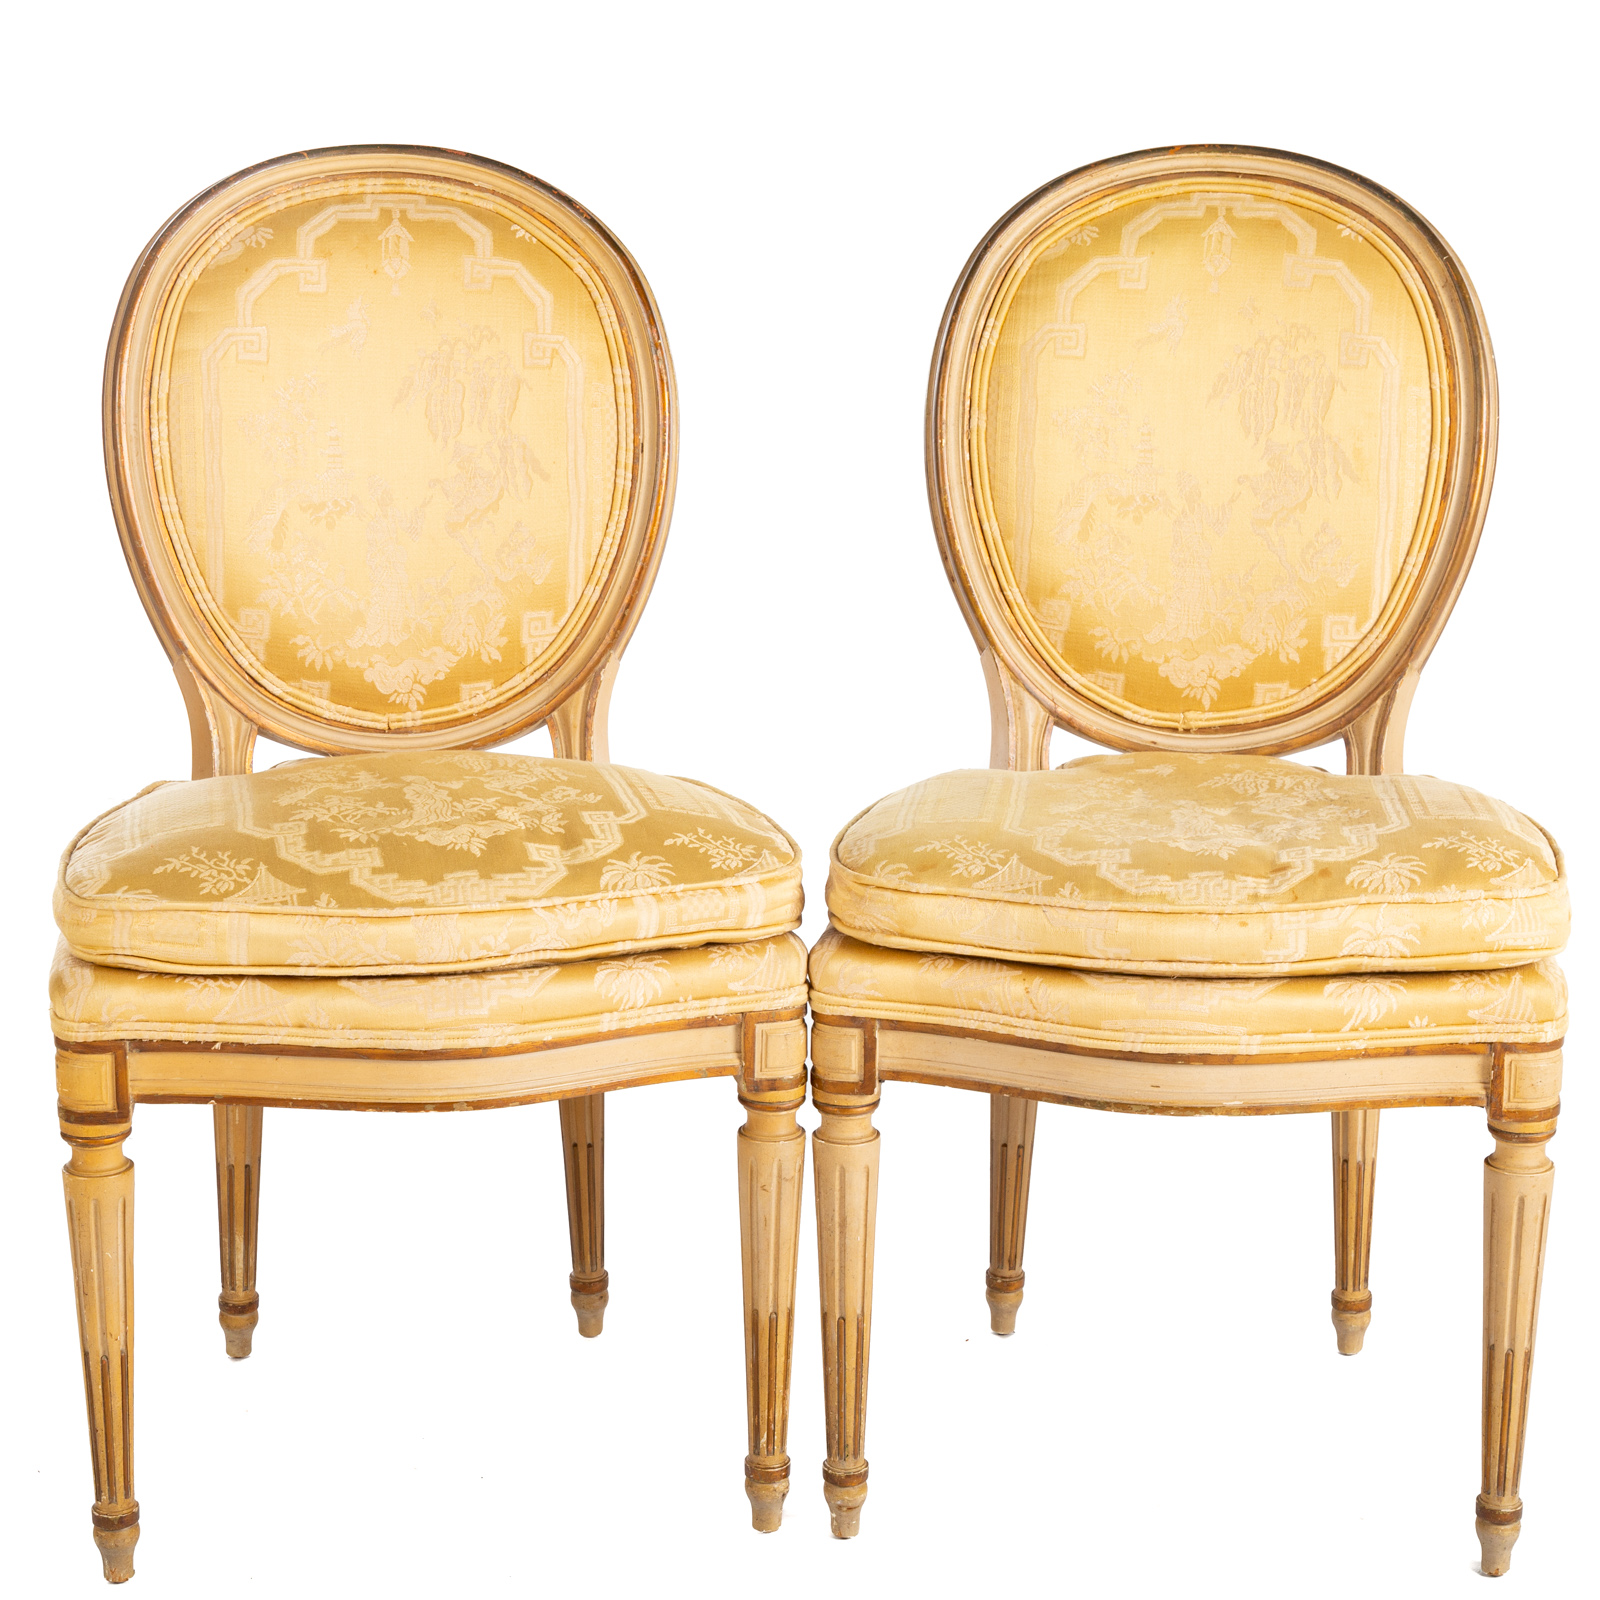 A PAIR OF LOUIS XVI STYLE PAINTED